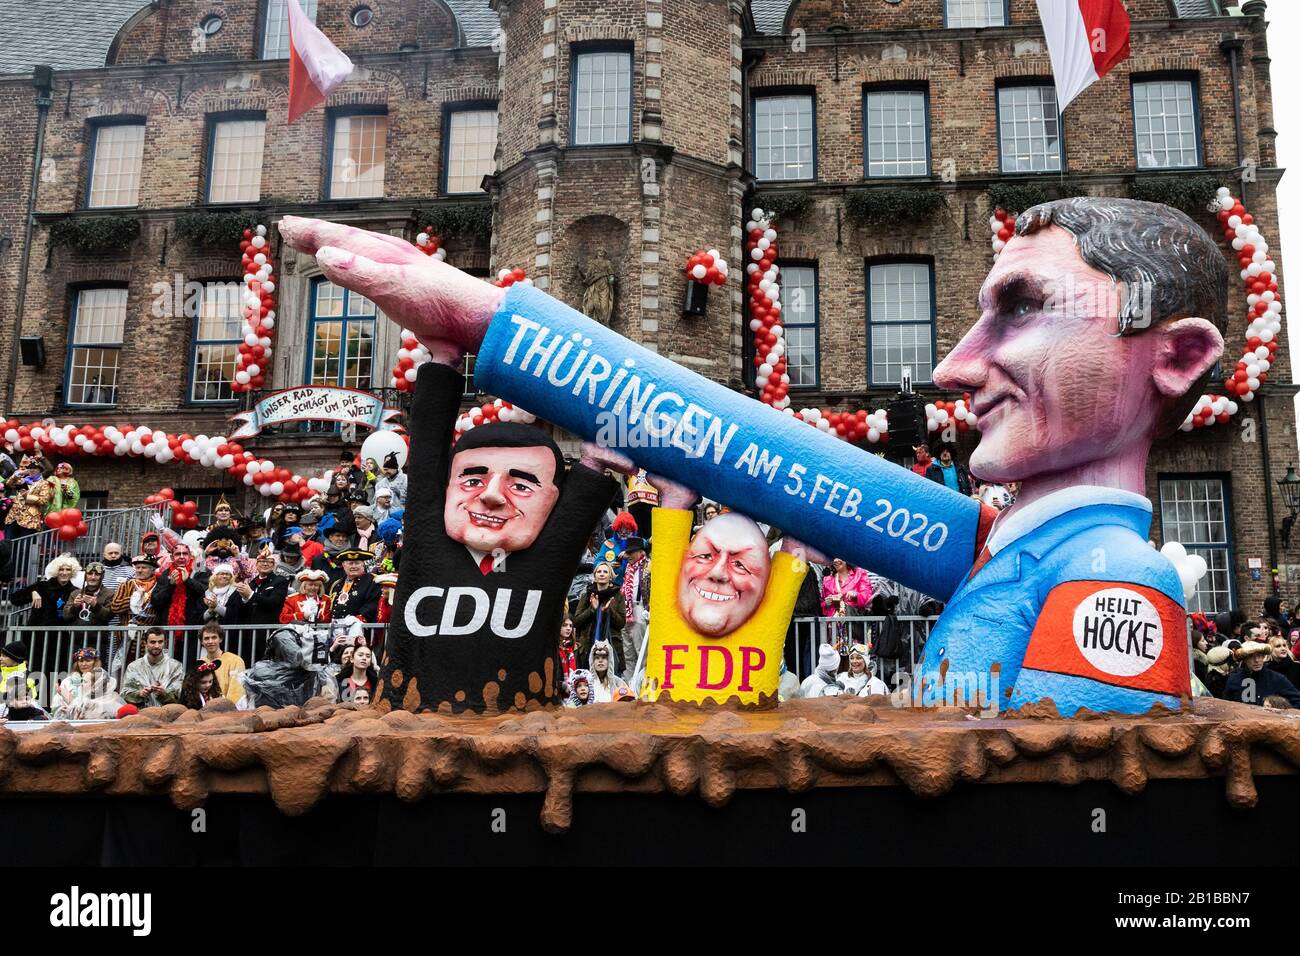 Dusseldorf, Germany. 24th Feb, 2020. Rosenmontag carnival parade in Dusseldorf, Germany. Float designed by German artist Jacques Tilly depicting right-wing politician Björn Höcke of the Afd party making a Sieg Heil gesture in relation to the state elections in Thuringia. Credit: Vibrant Pictures/Alamy Live News Stock Photo